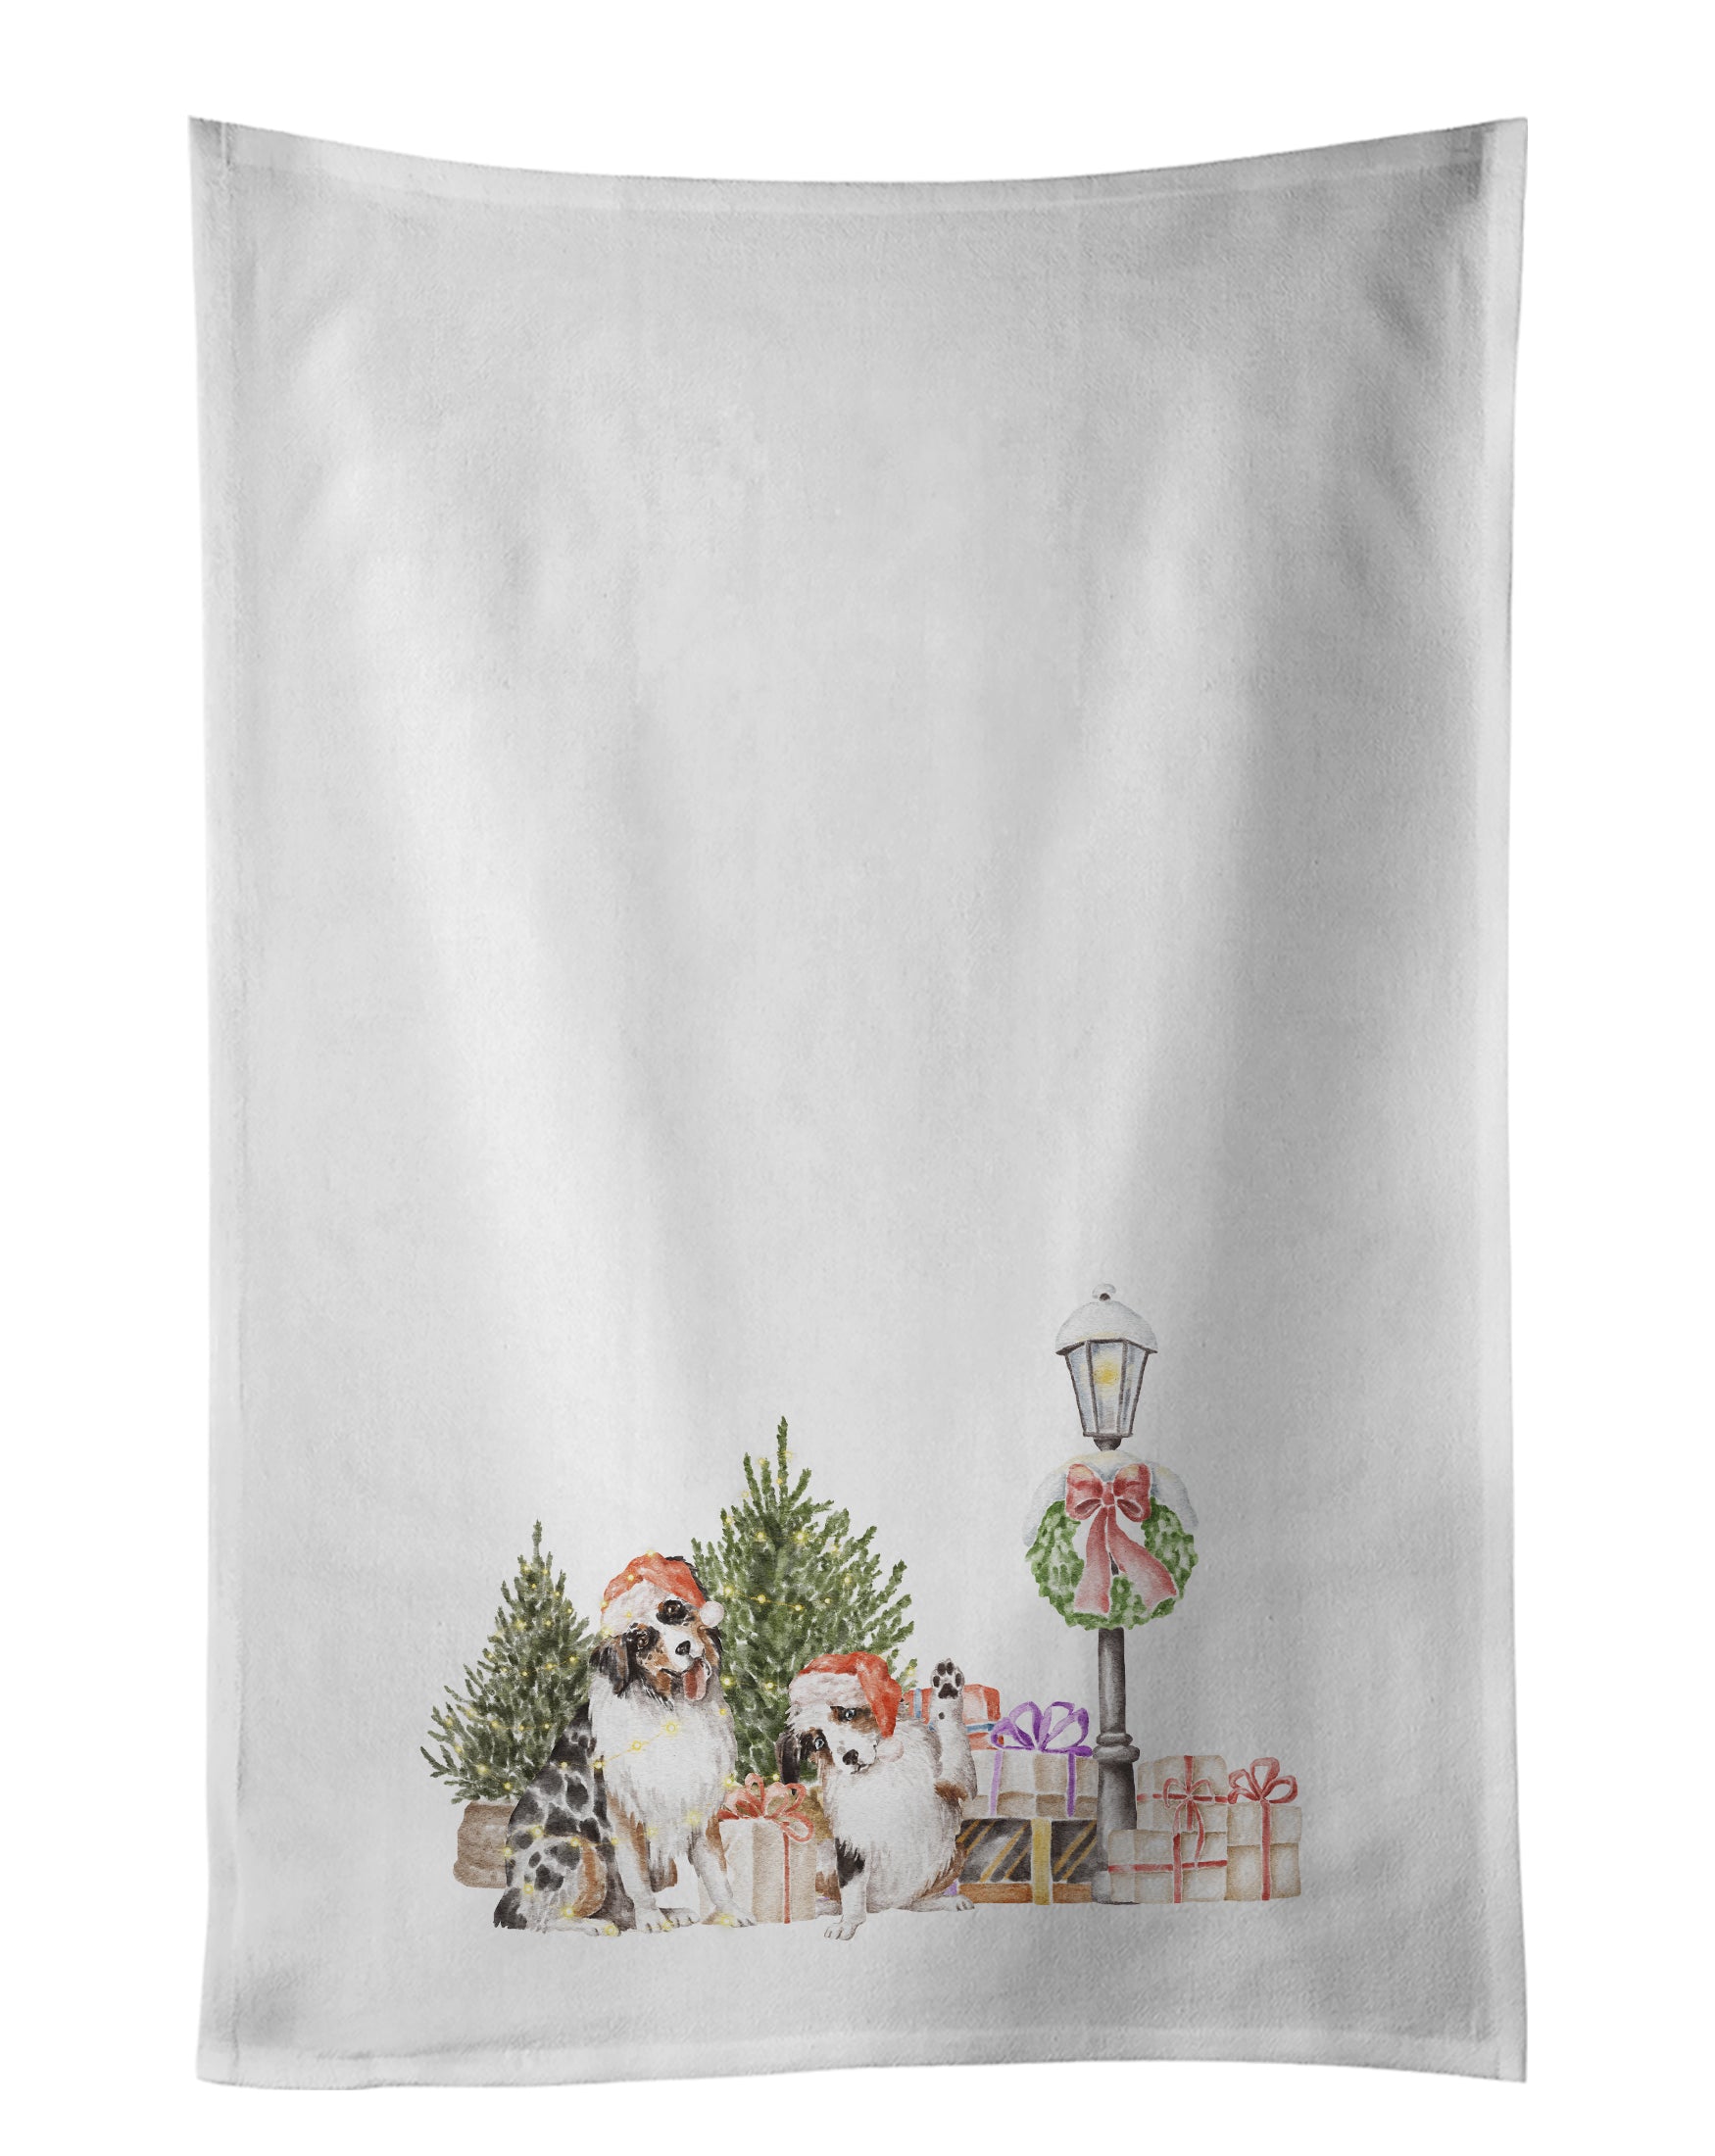 Buy this Australian Shepherd Excited Adult and Puppy with Christmas Wonderland White Kitchen Towel Set of 2